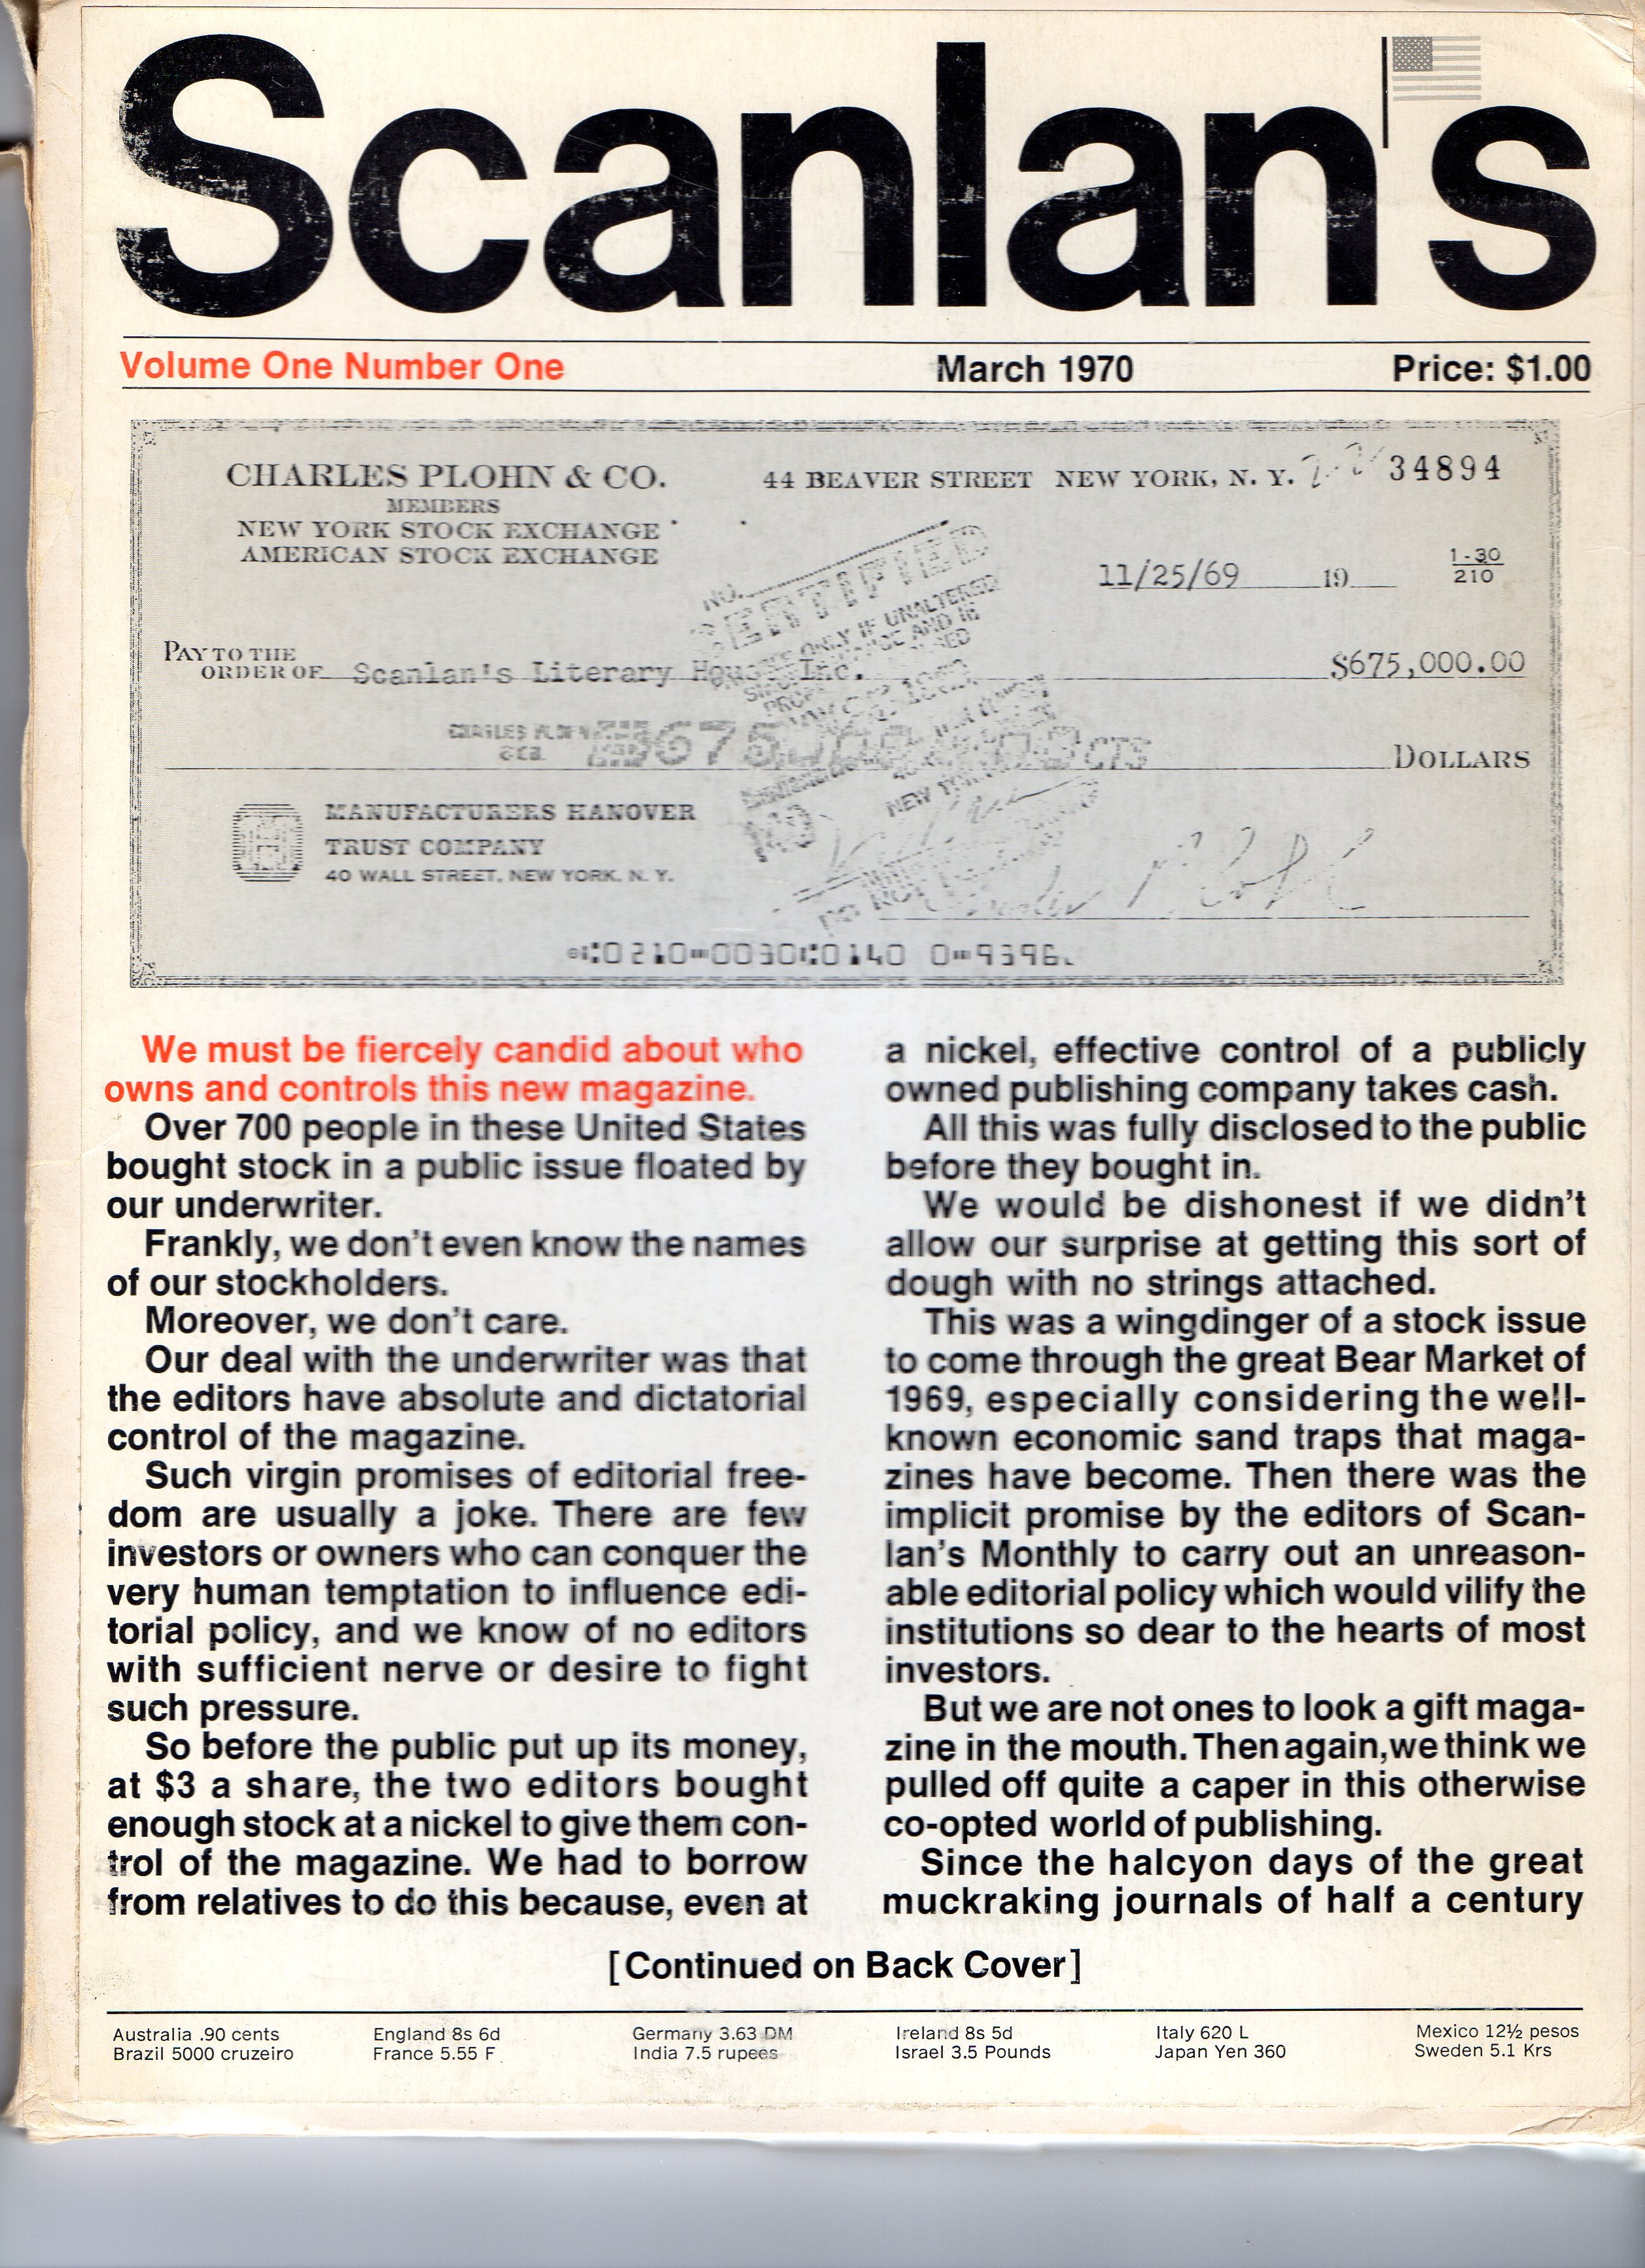 The first issue of Scanlan's Monthly, March 1970